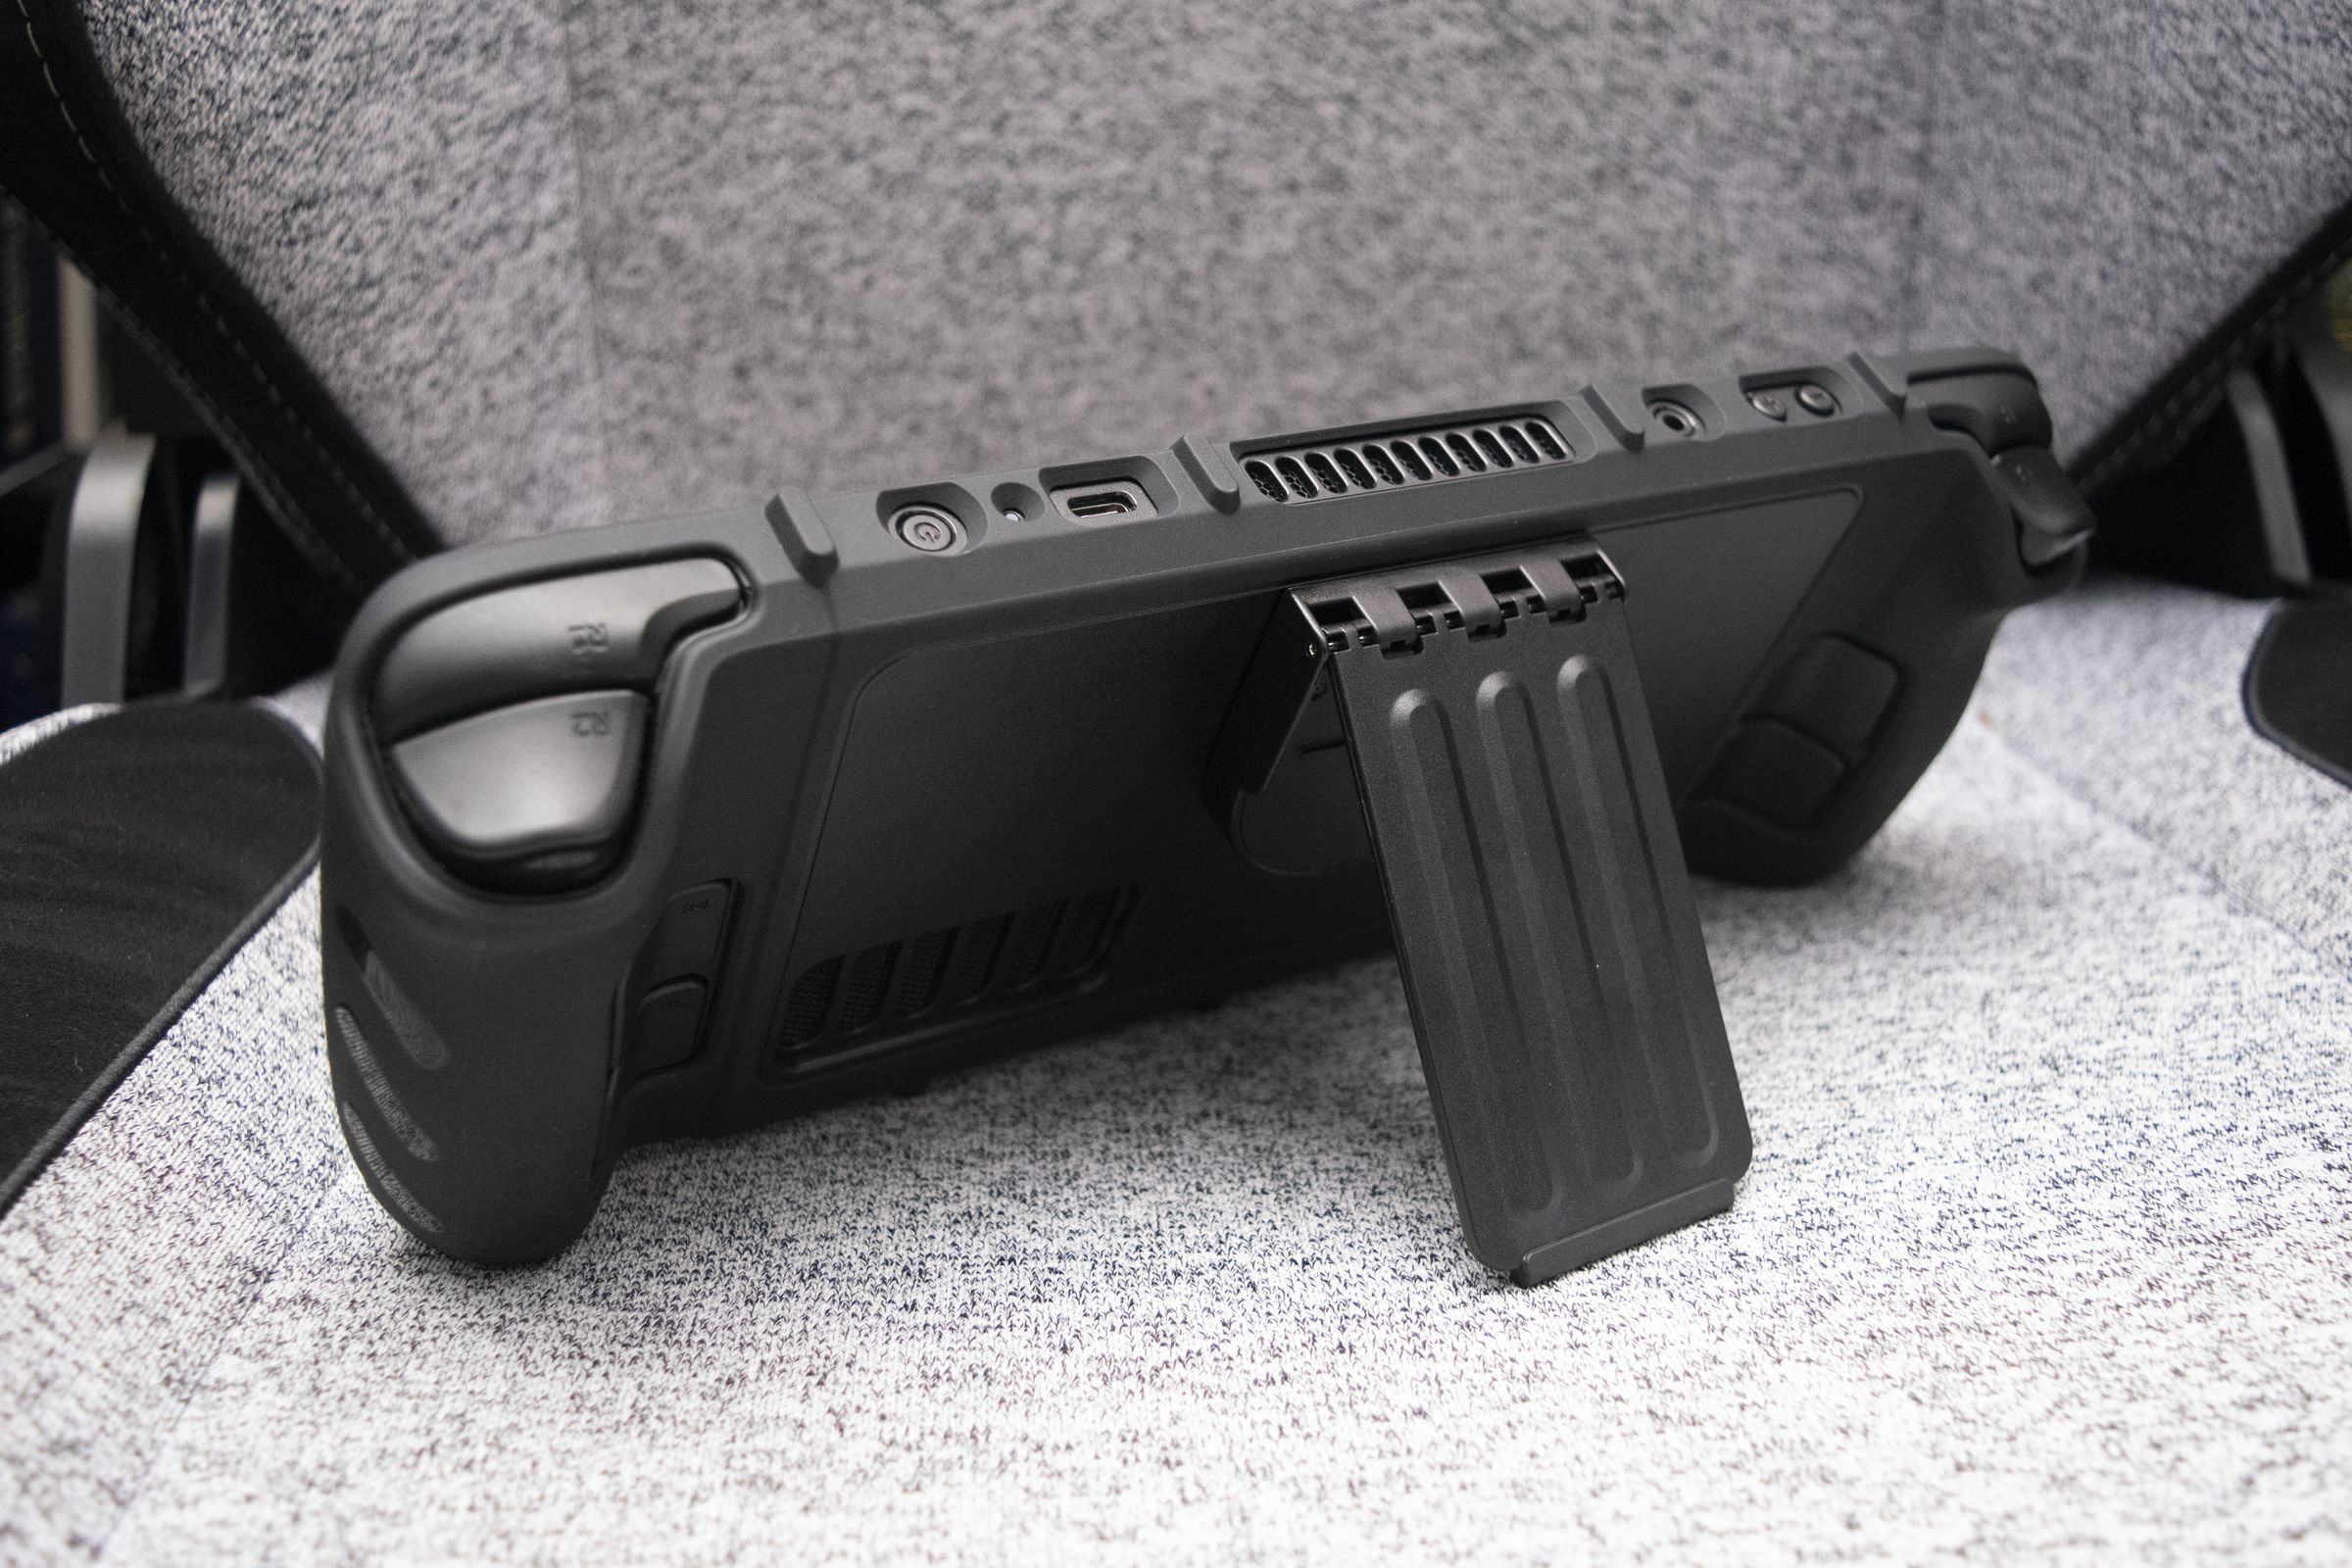 A photo of the back of the Killswitch case with the magnetic kickstand attached and extended